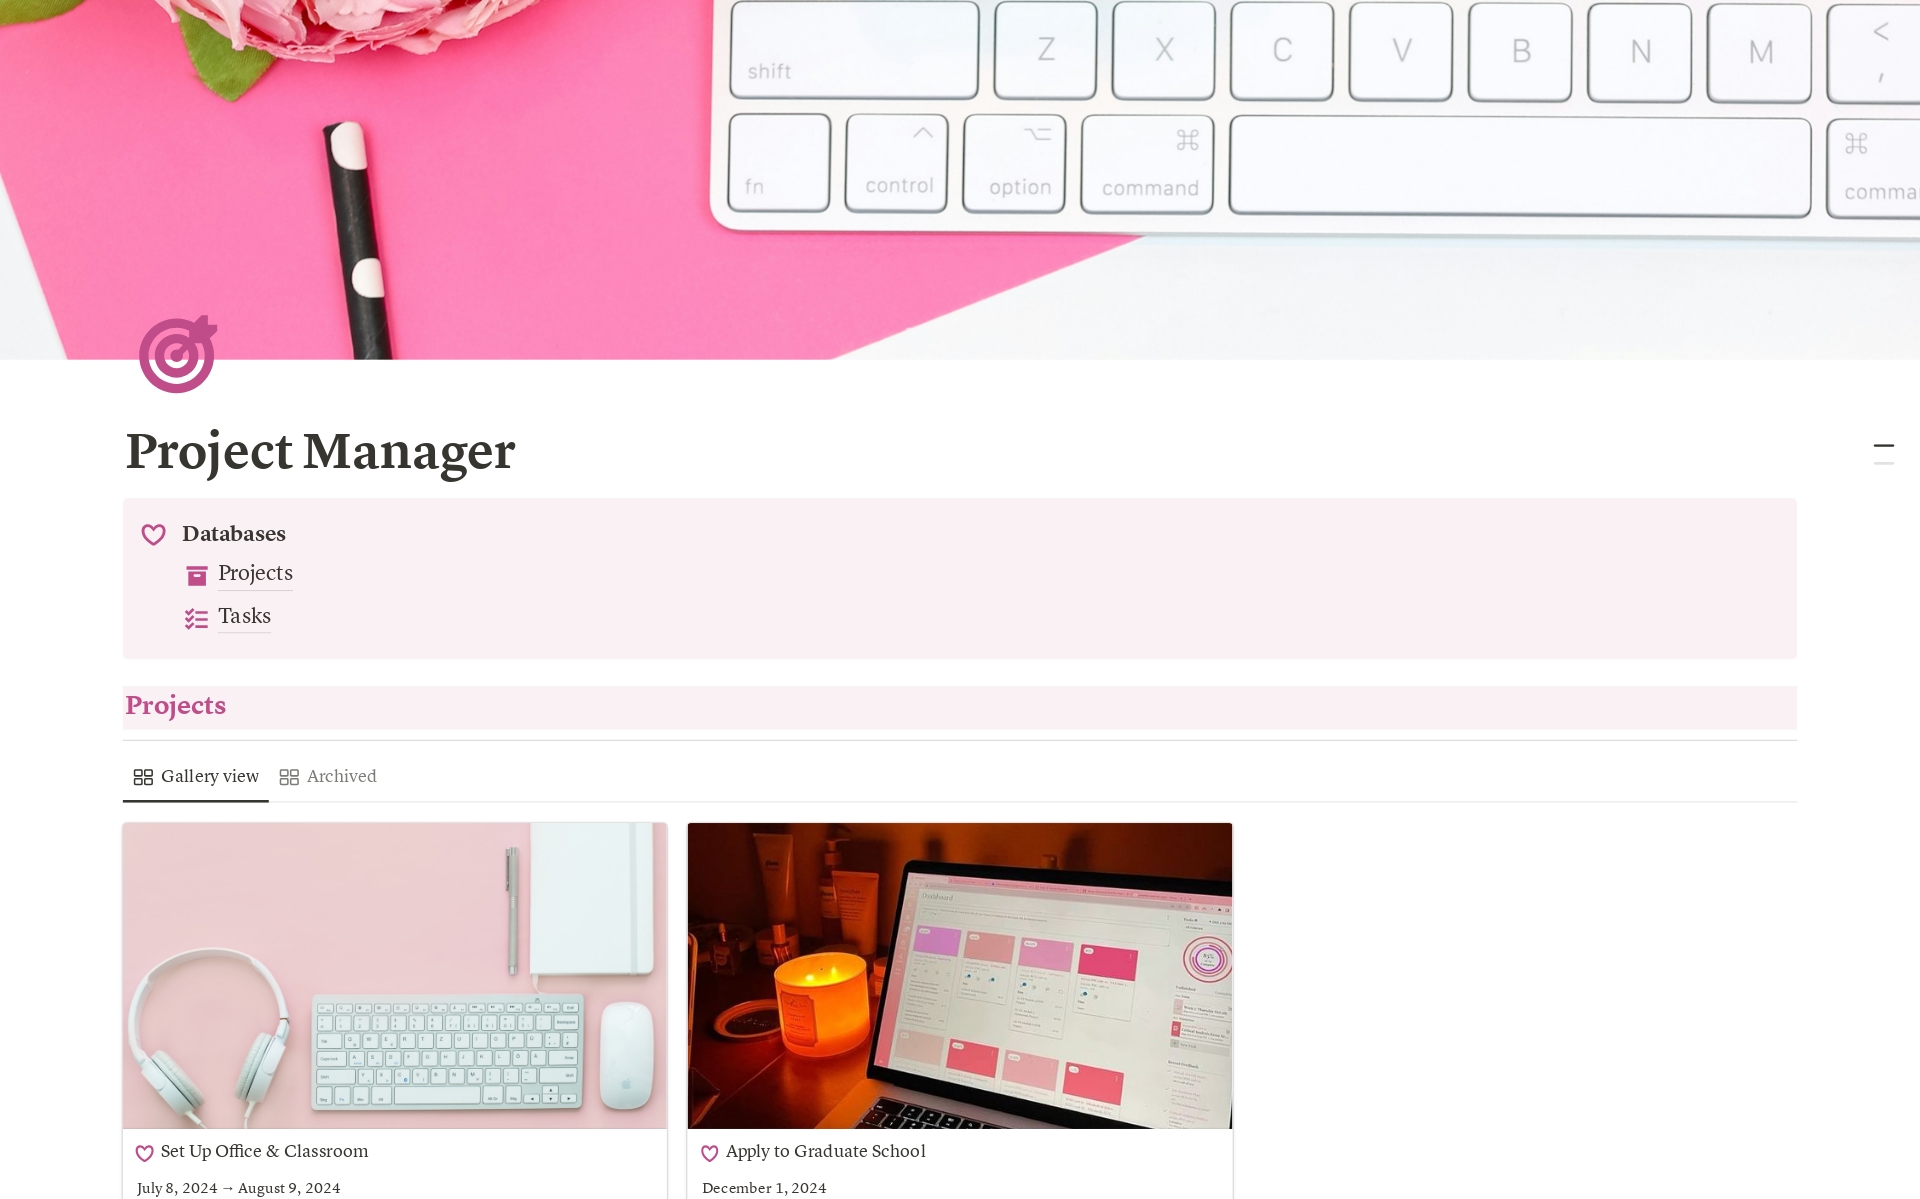 Are you a project manager looking for a tool that’s both functional and fabulous? Look no further! Introducing the Project Manager Template (in pink) – your new best friend in project management.
